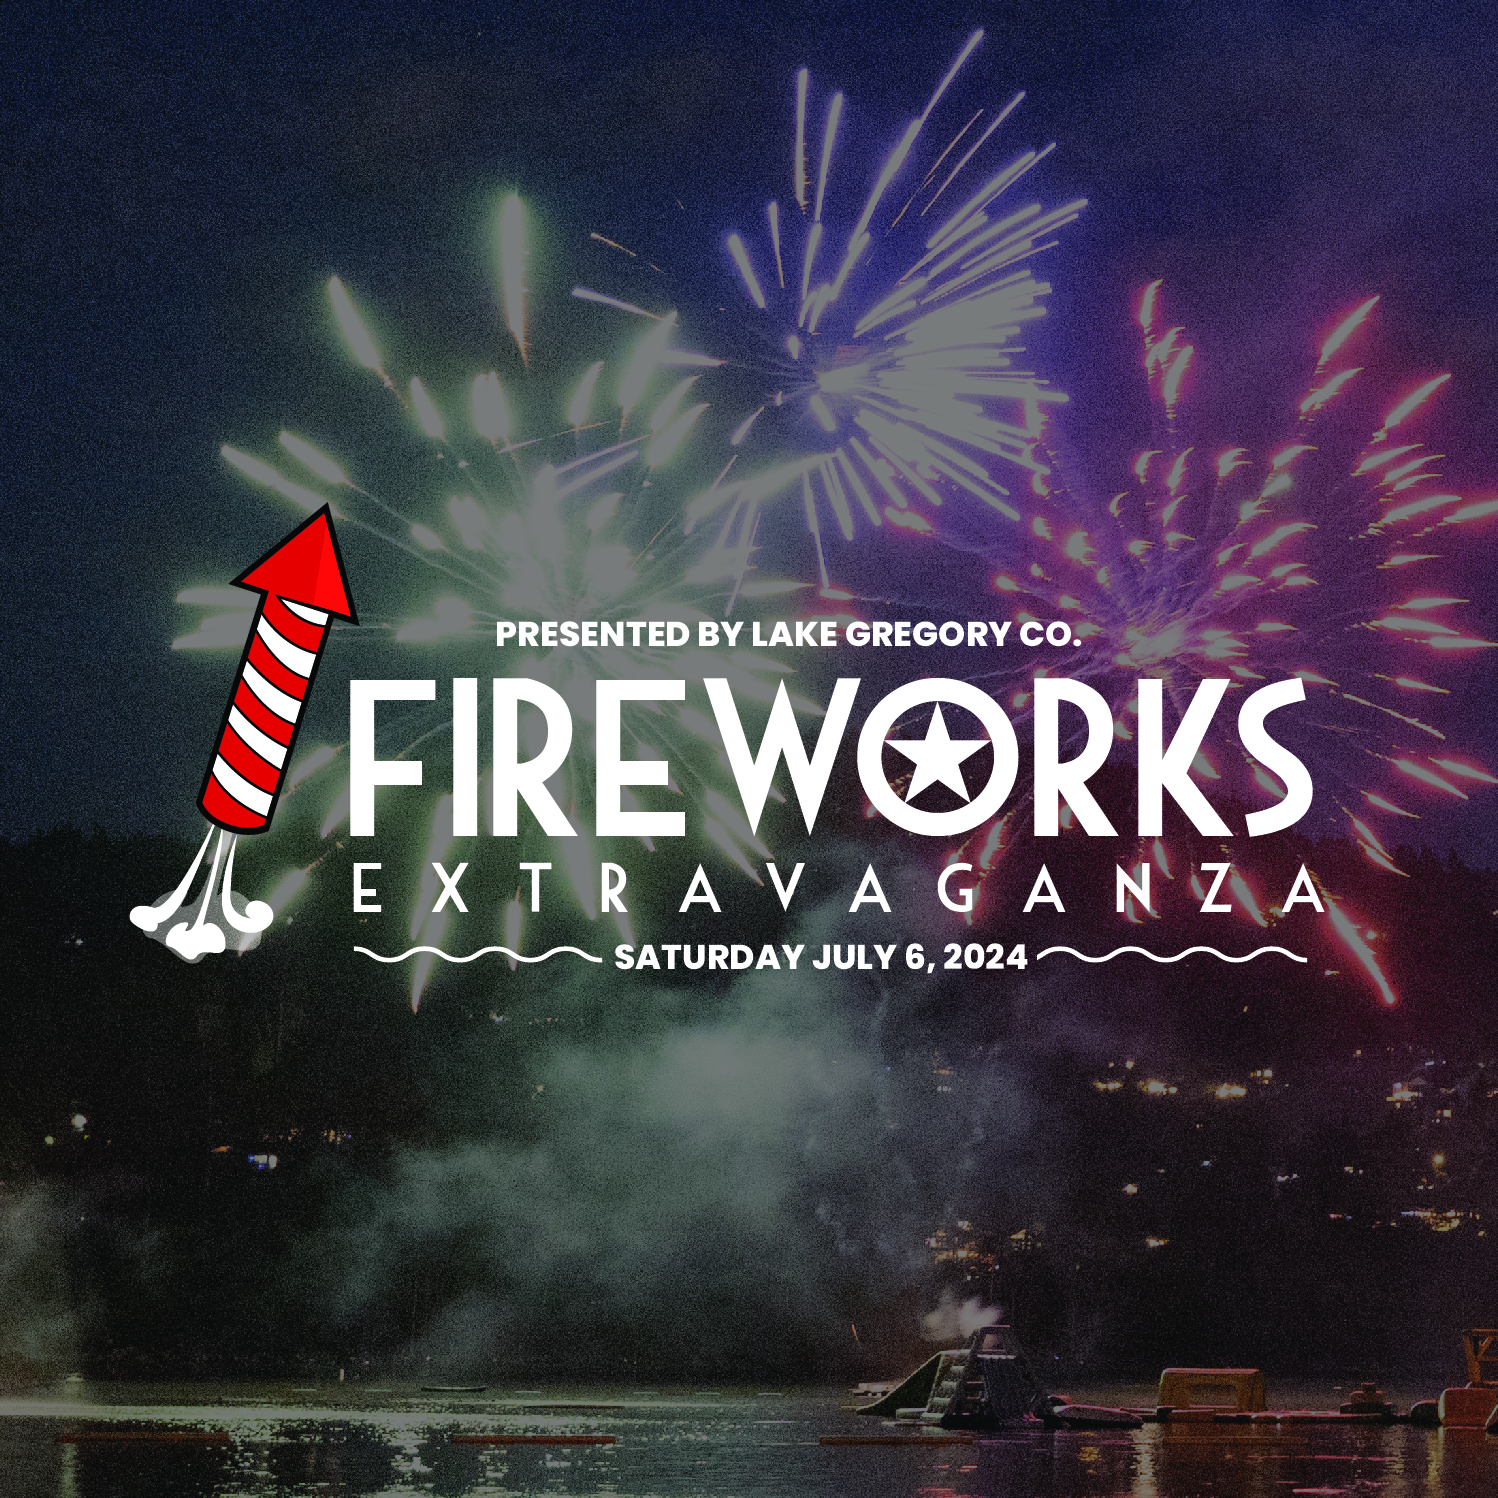 A graphic with fireworks in the background advertising the free Fireworks Extravaganza show at Lake Gregory on July 6 at 9 p.m.